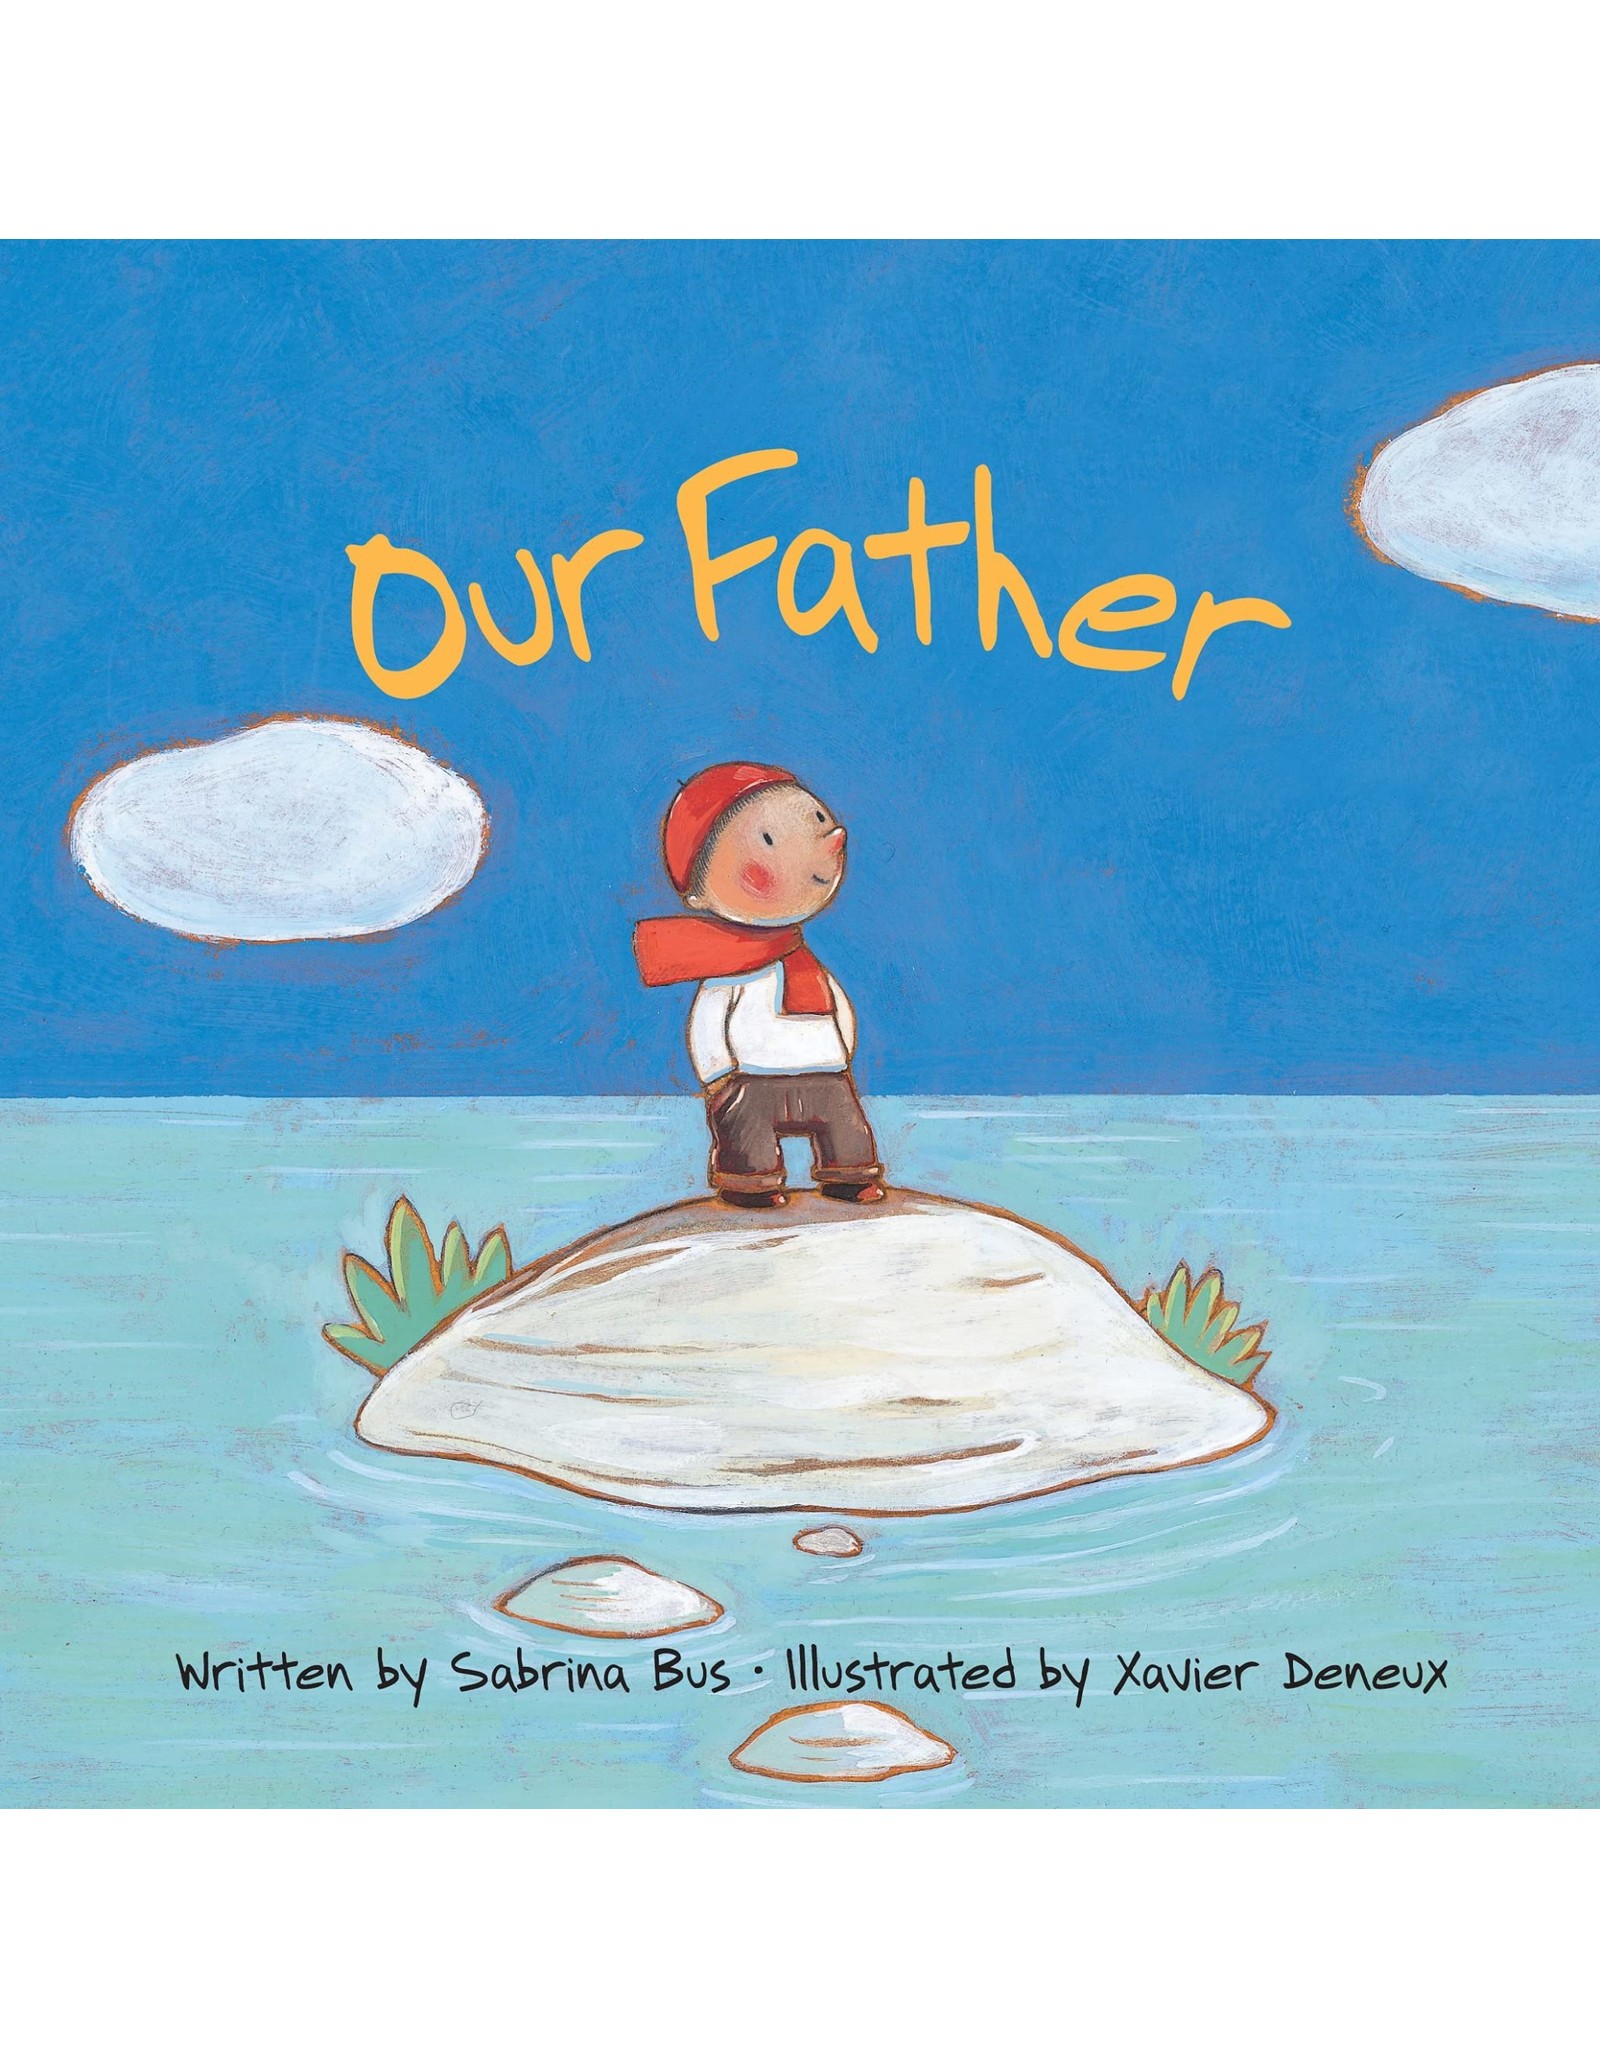 Eerdmans Books for Young Readers Our Father Board Book